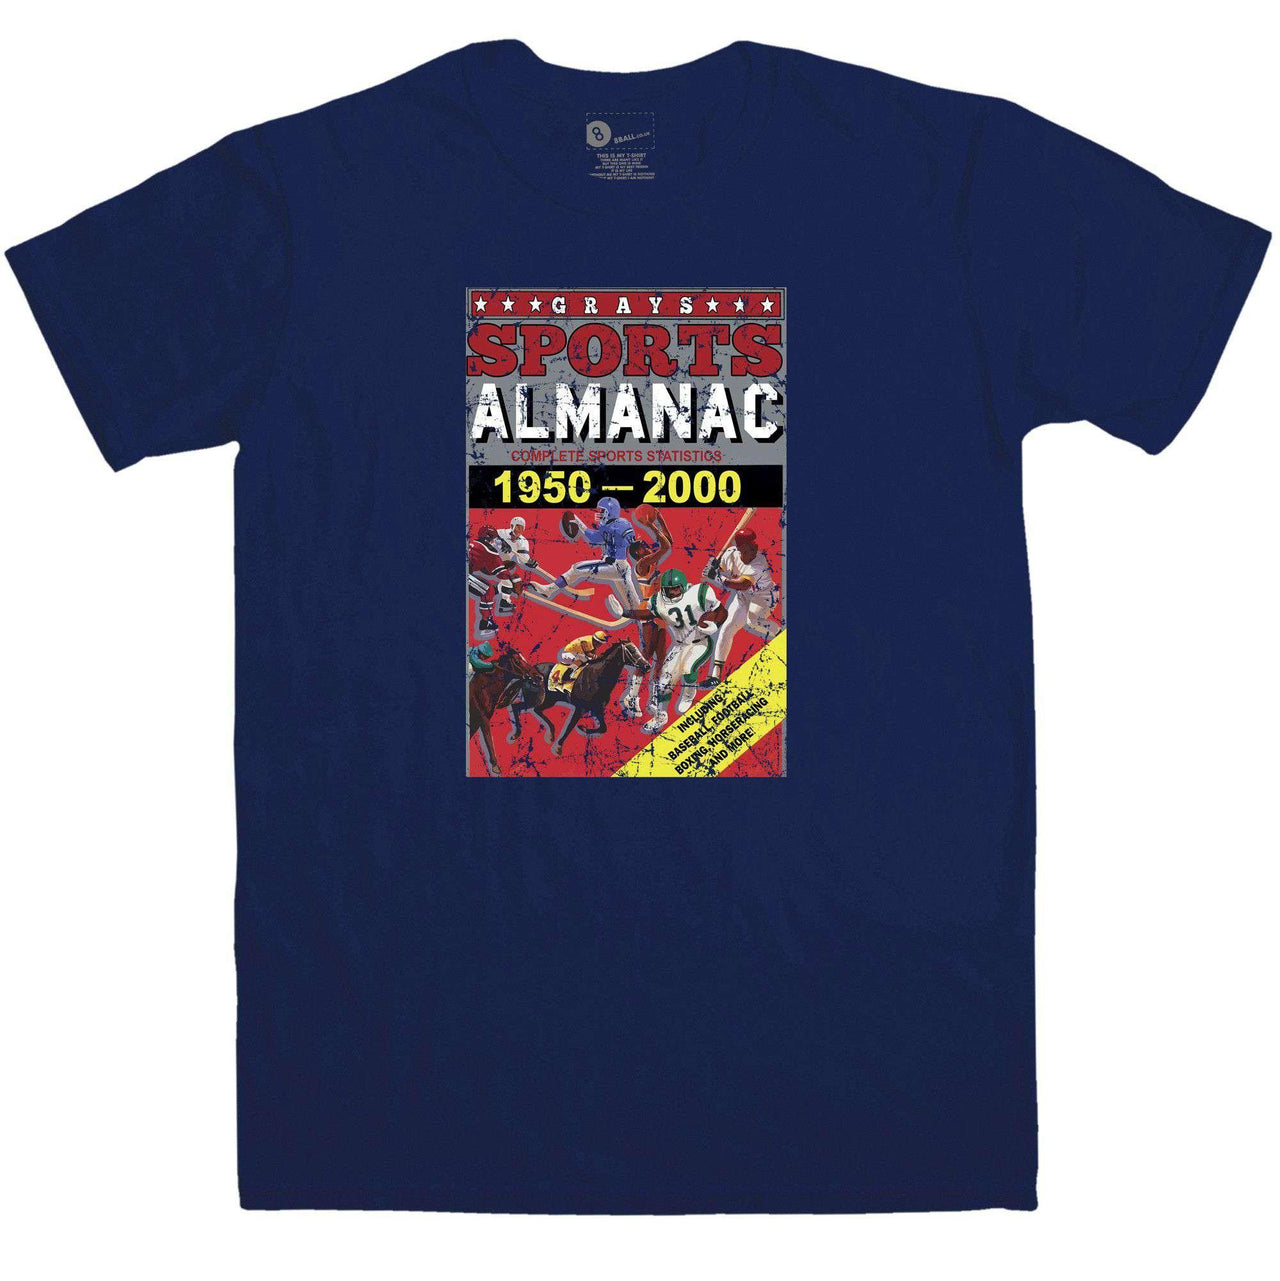 The Sports Almanac Graphic T-Shirt For Men 8Ball